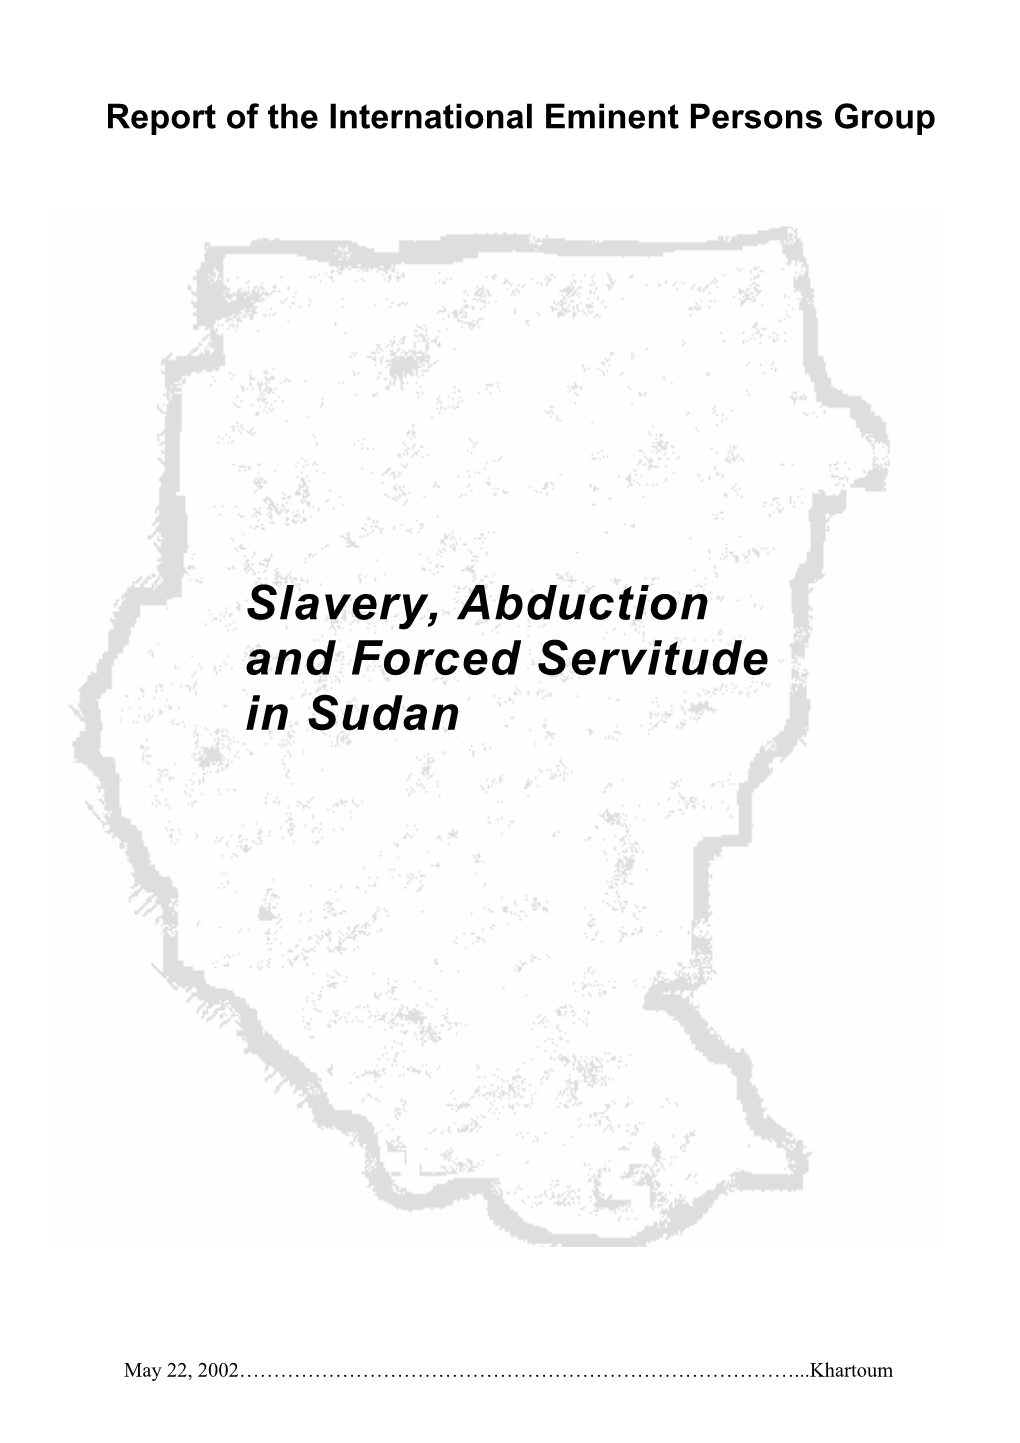 We Gratefully Acknowledge the Generous Assistance and Valuable Information Provided Us by Sudanese from a Wide Range of Viewpo